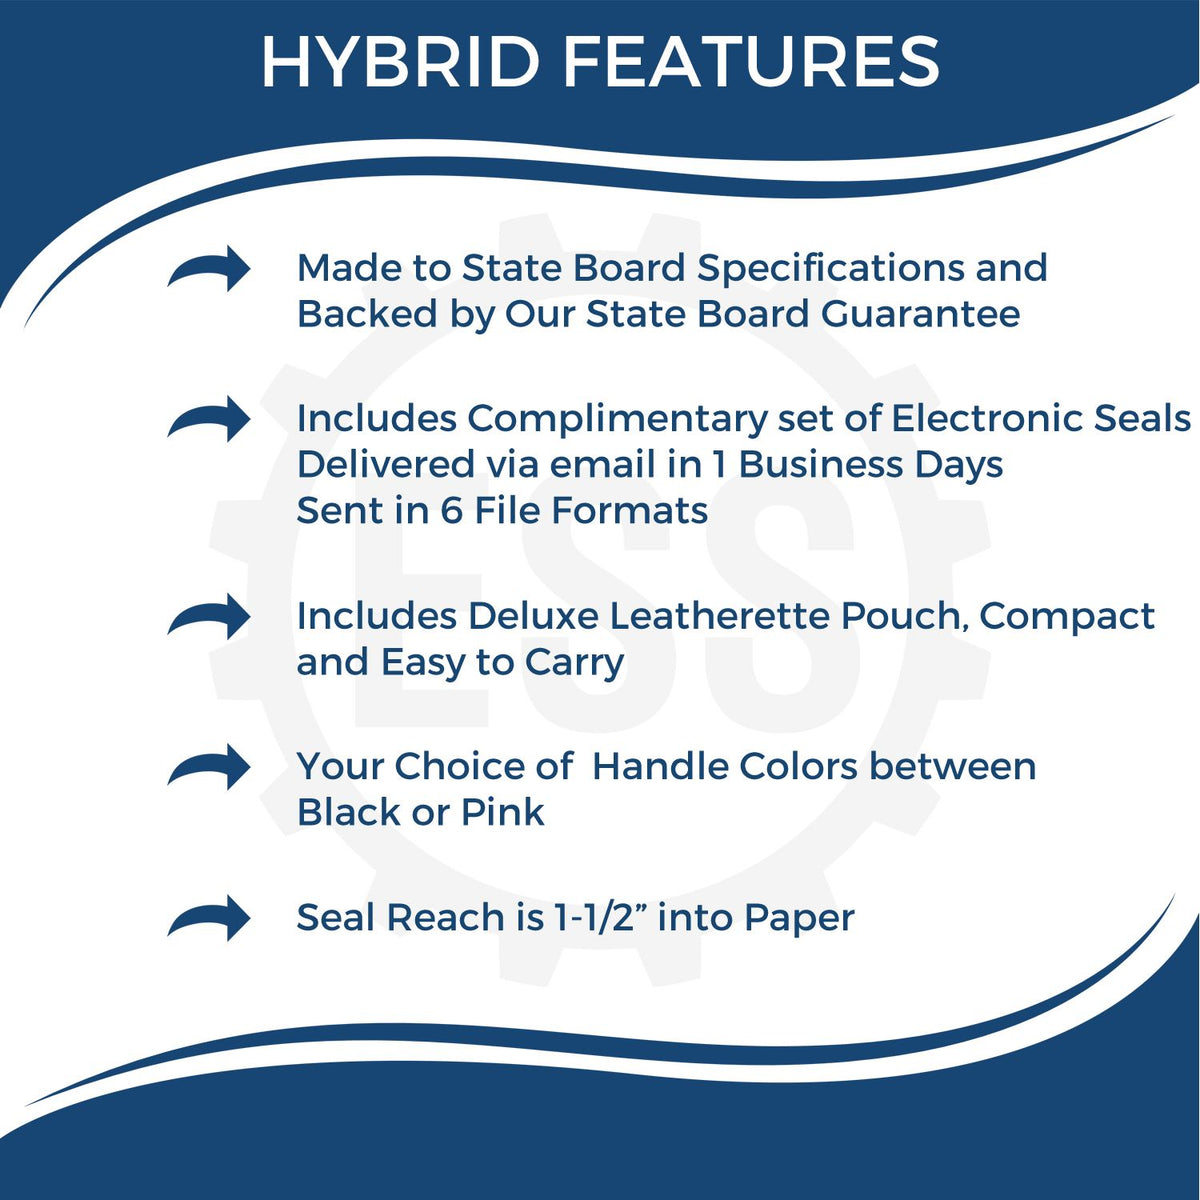 A picture of an infographic highlighting the selling points for the Hybrid Ohio Landscape Architect Seal